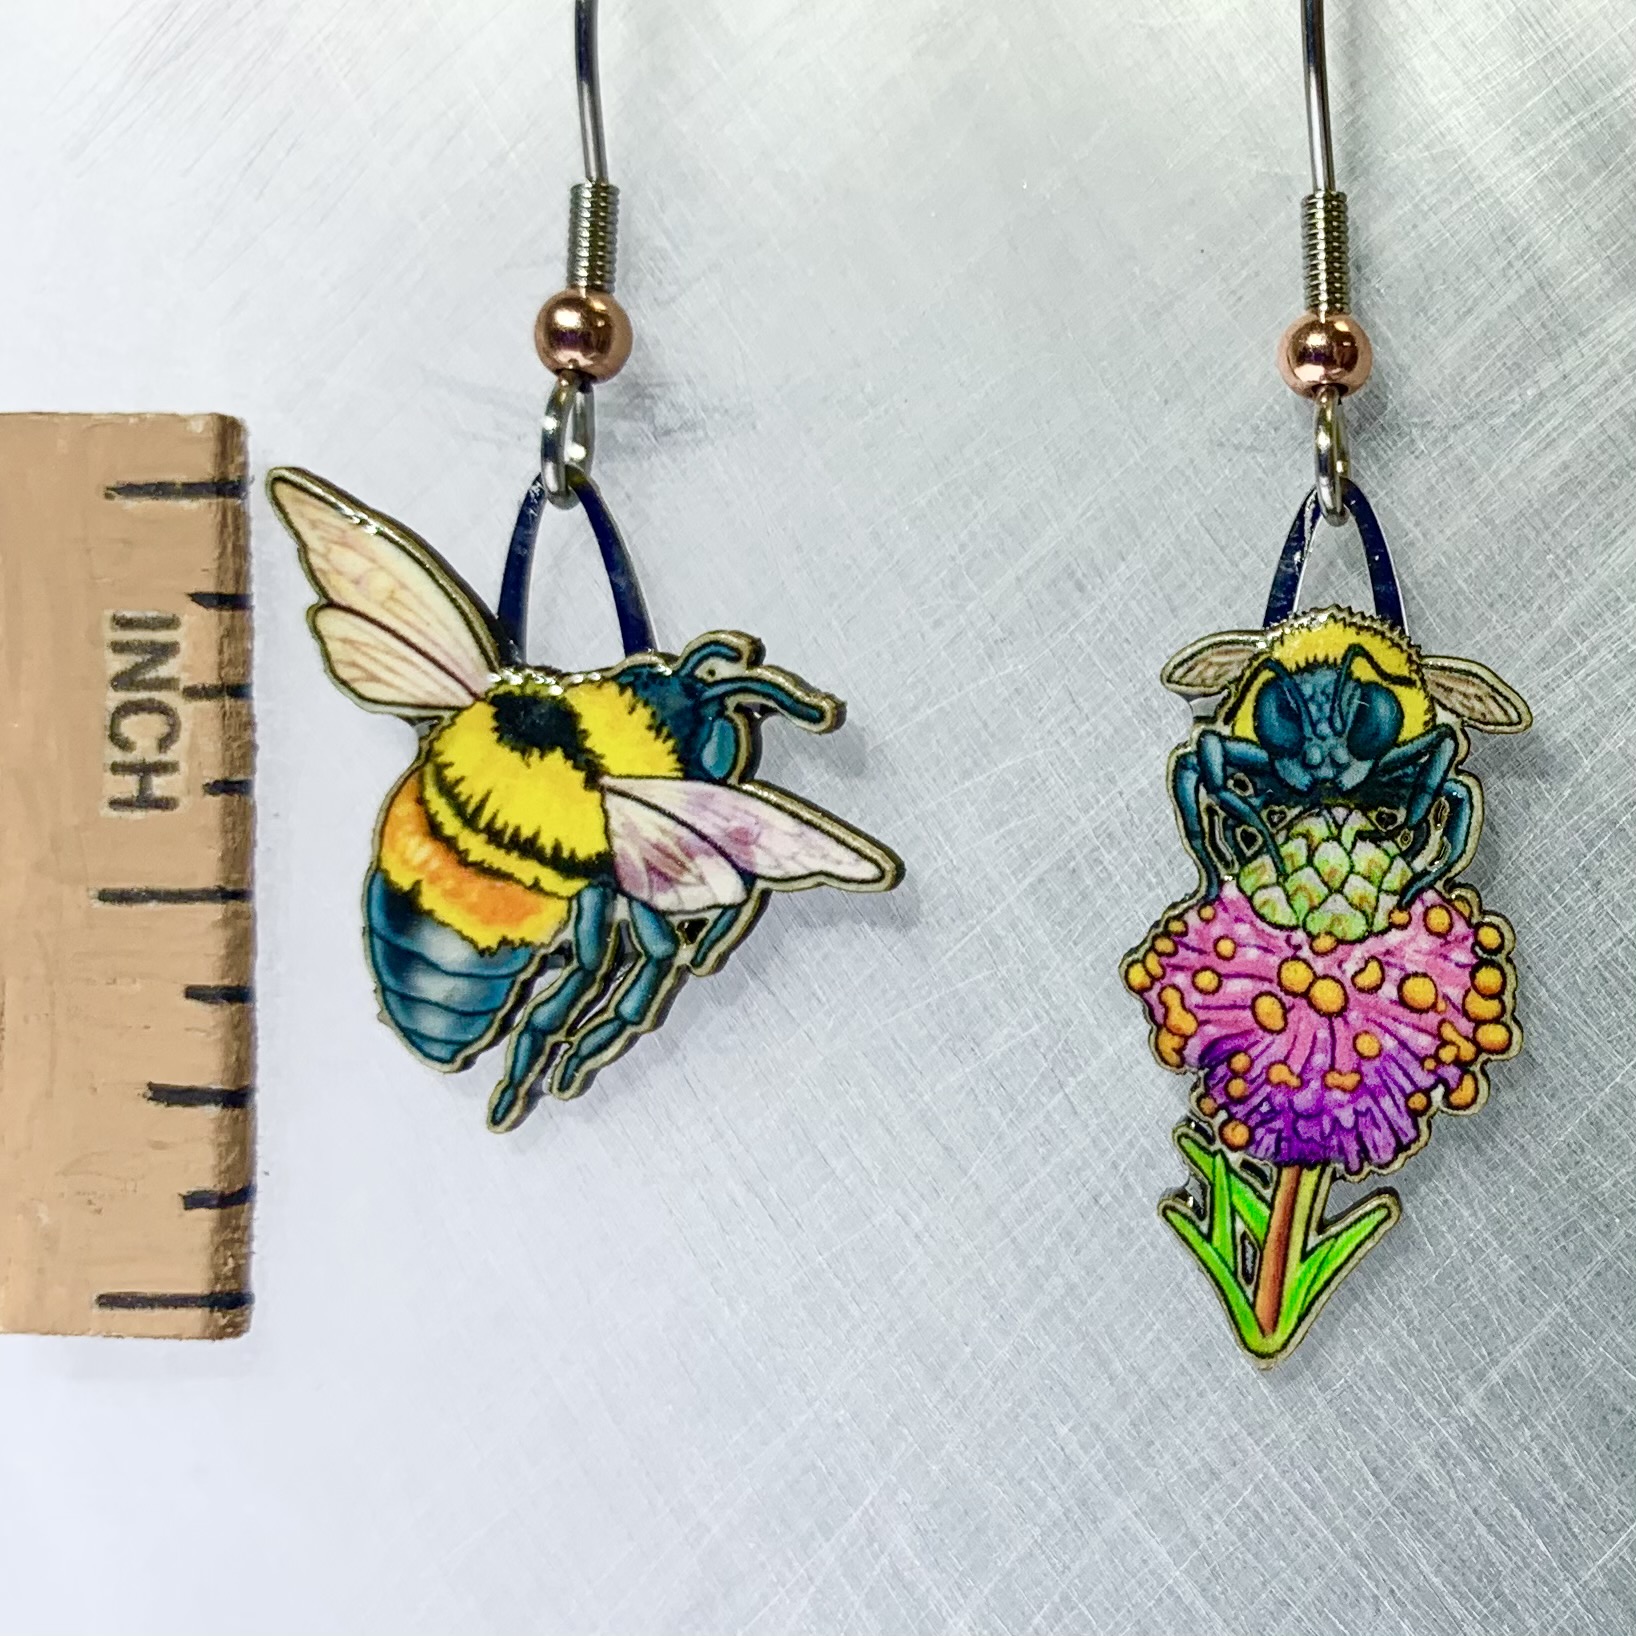 Picture shown is of 1 inch tall pair of earrings of the bug the Rusty-Patched Bumble Bee.